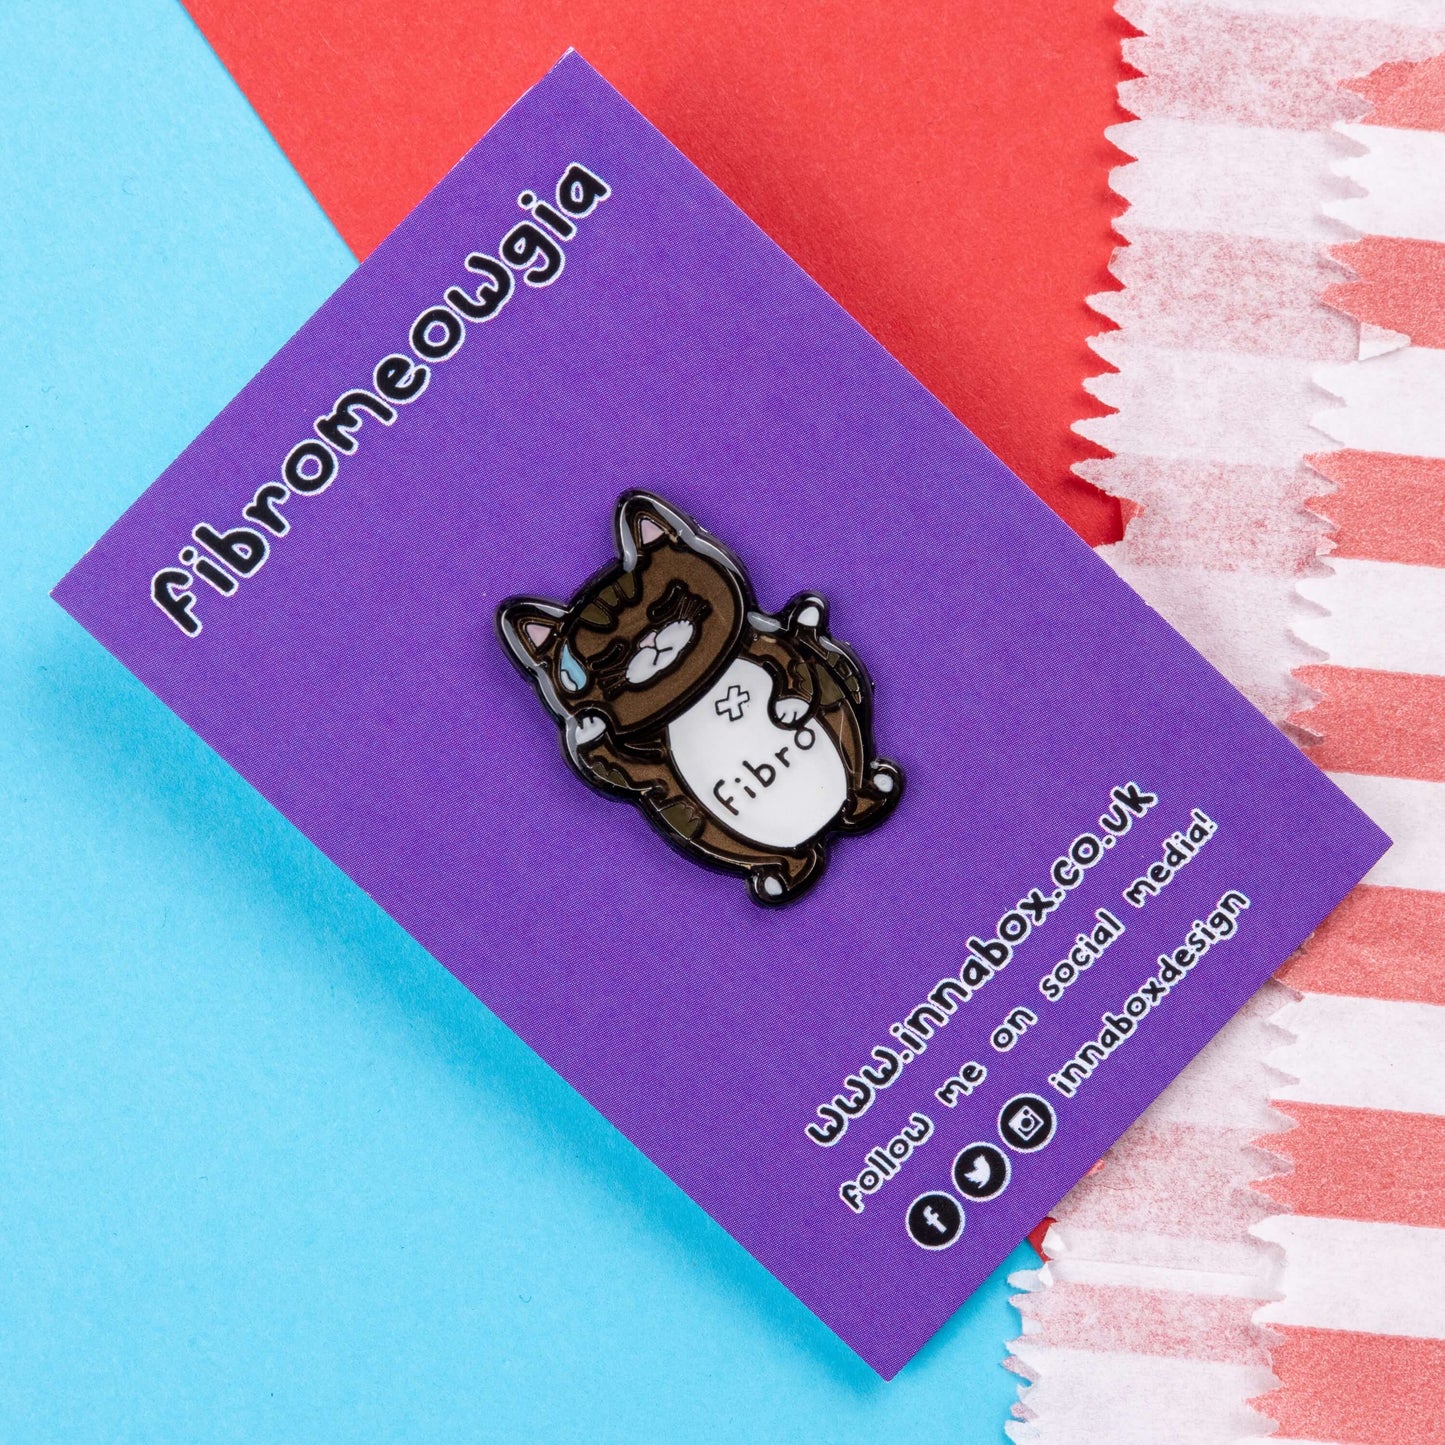 Fibromeowgia Enamel Pin - Fibromyalgia on purple backing card laid on a red and blue background. The enamel pin is a brown cat with a white stomach with fibro written across it. The cat has its eyes closed, a sweat droplet on its forehead and holding its head in its paw. The enamel pin is designed to raise awareness for fibromyalgia.